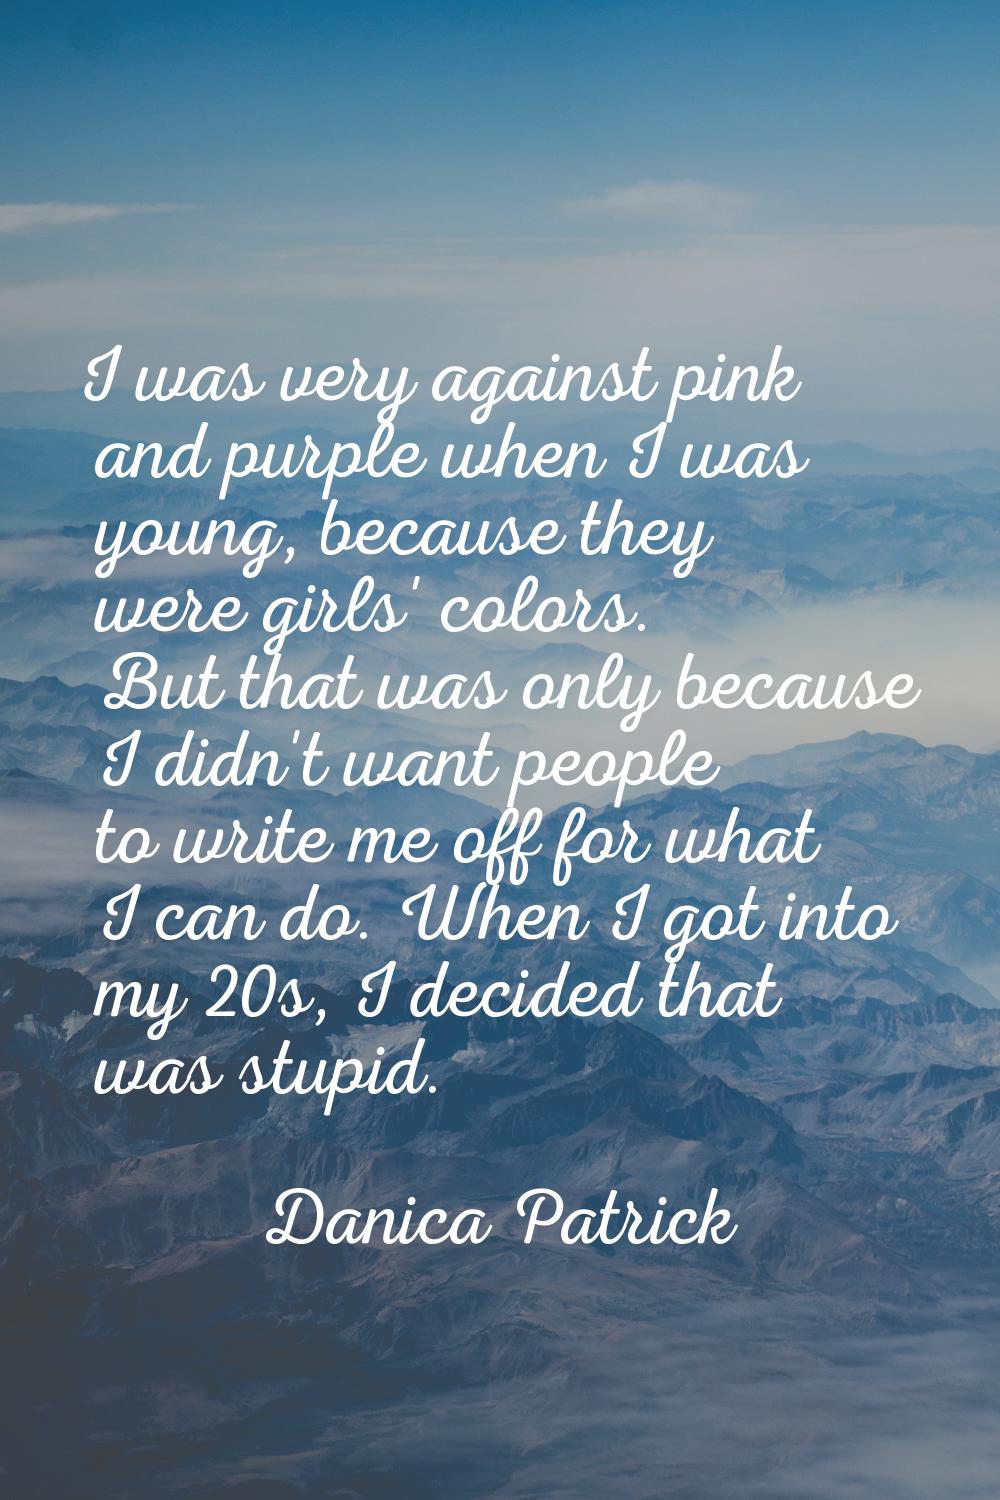 I was very against pink and purple when I was young, because they were girls' colors. But that was 